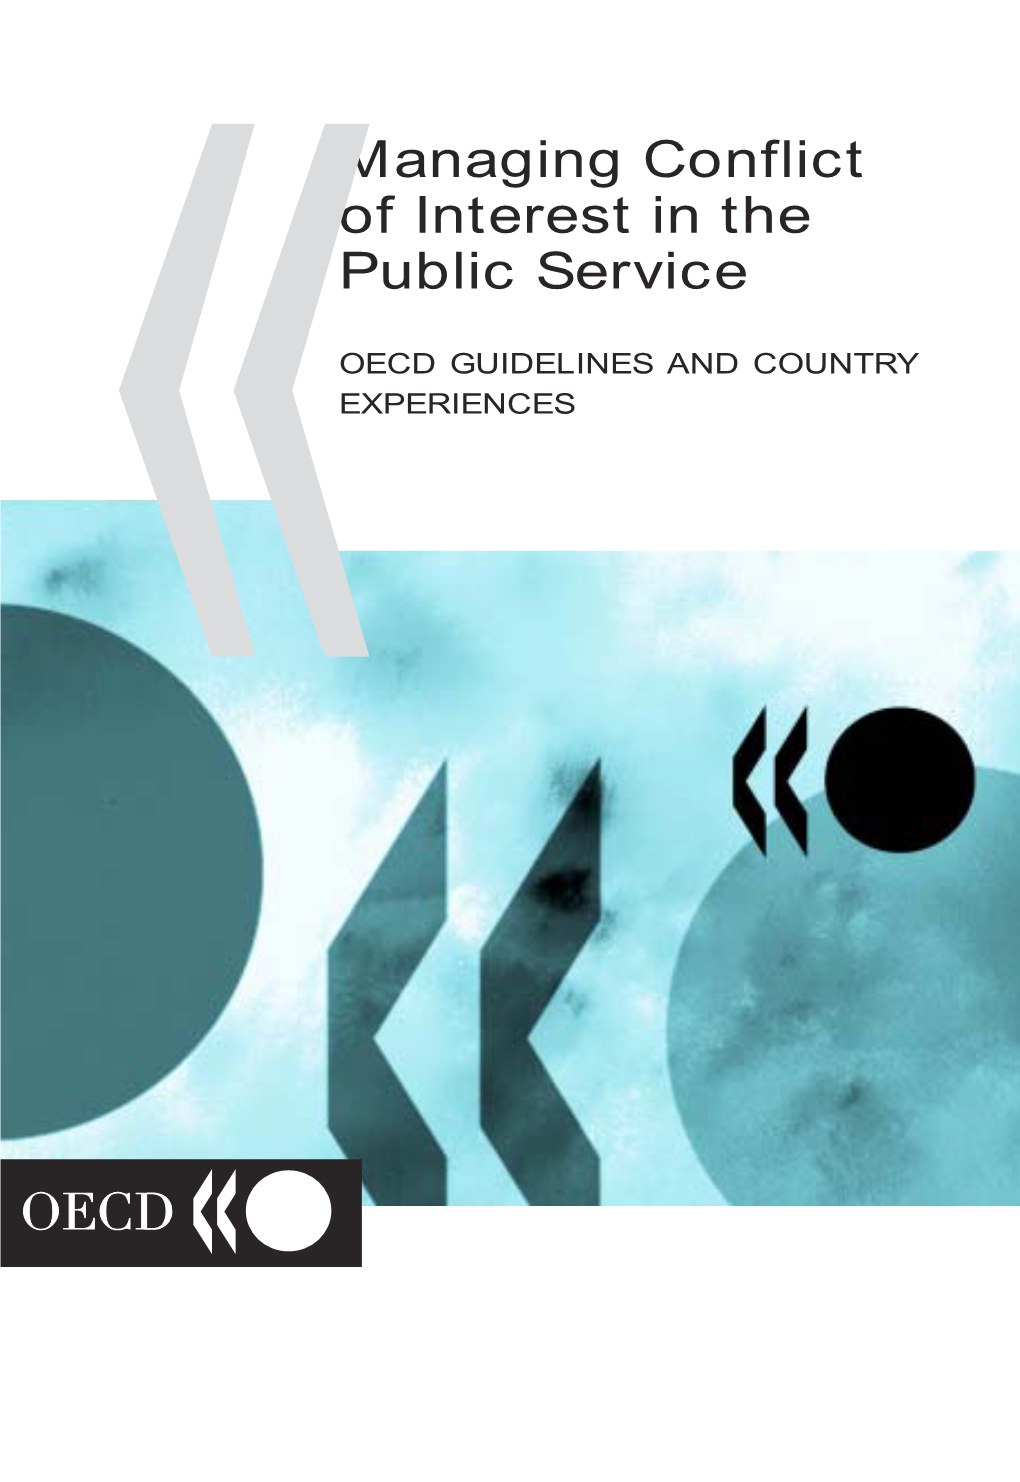 OECD Guidelines for Managing Conflict of Interest in the Public Service Provide the First International Benchmark in This Field